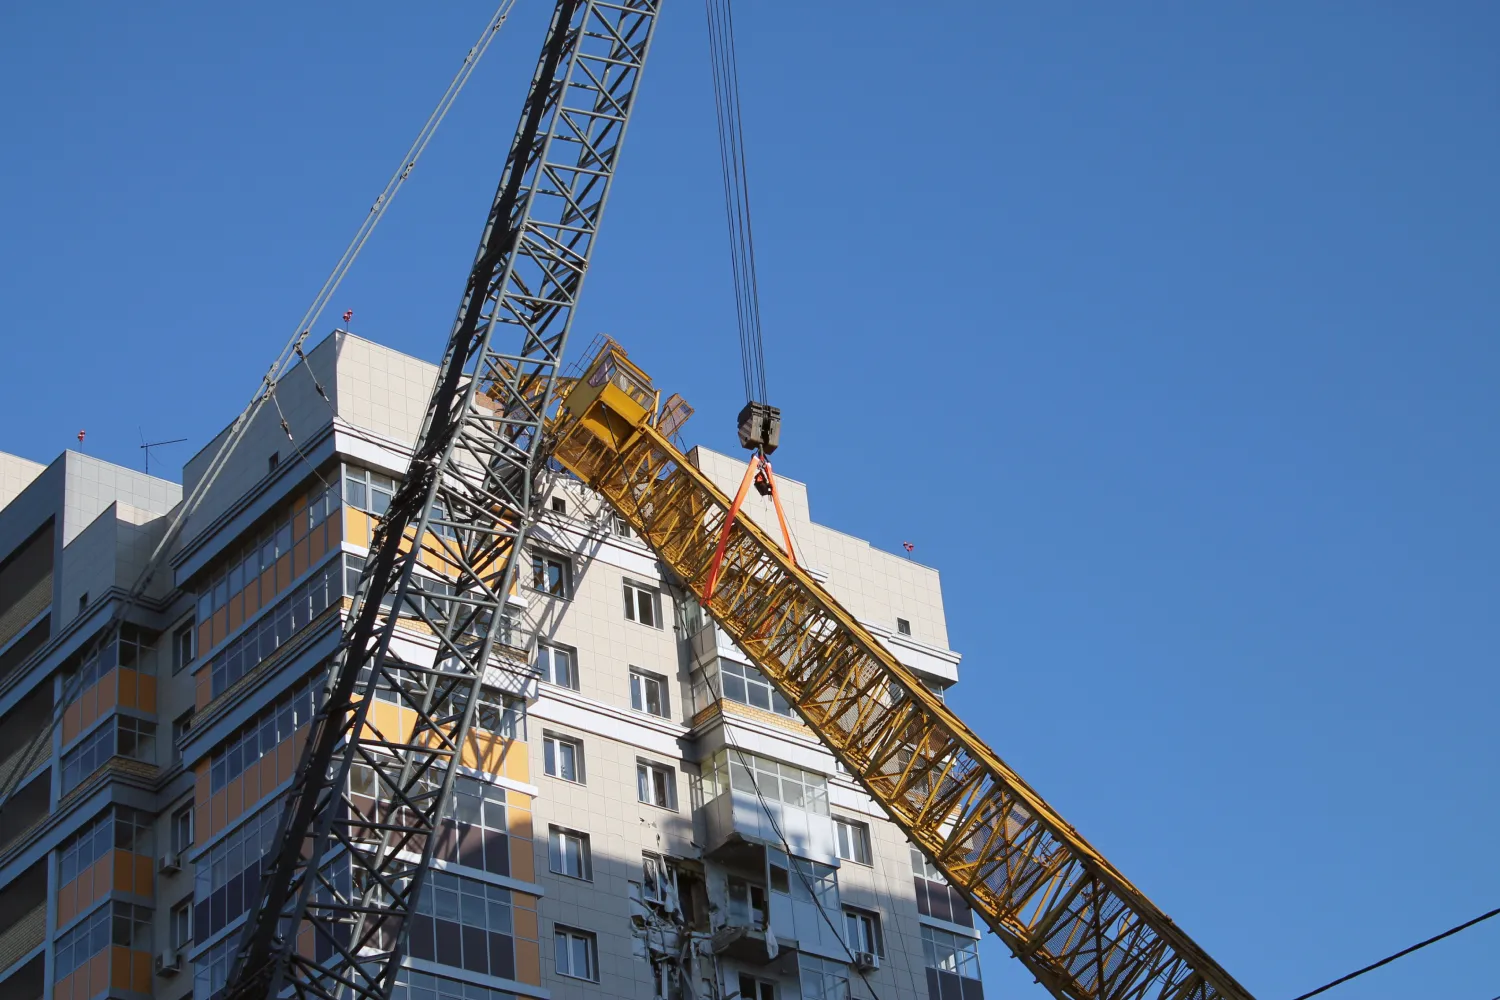 What Are The Most Common Types Of Crane Accidents?